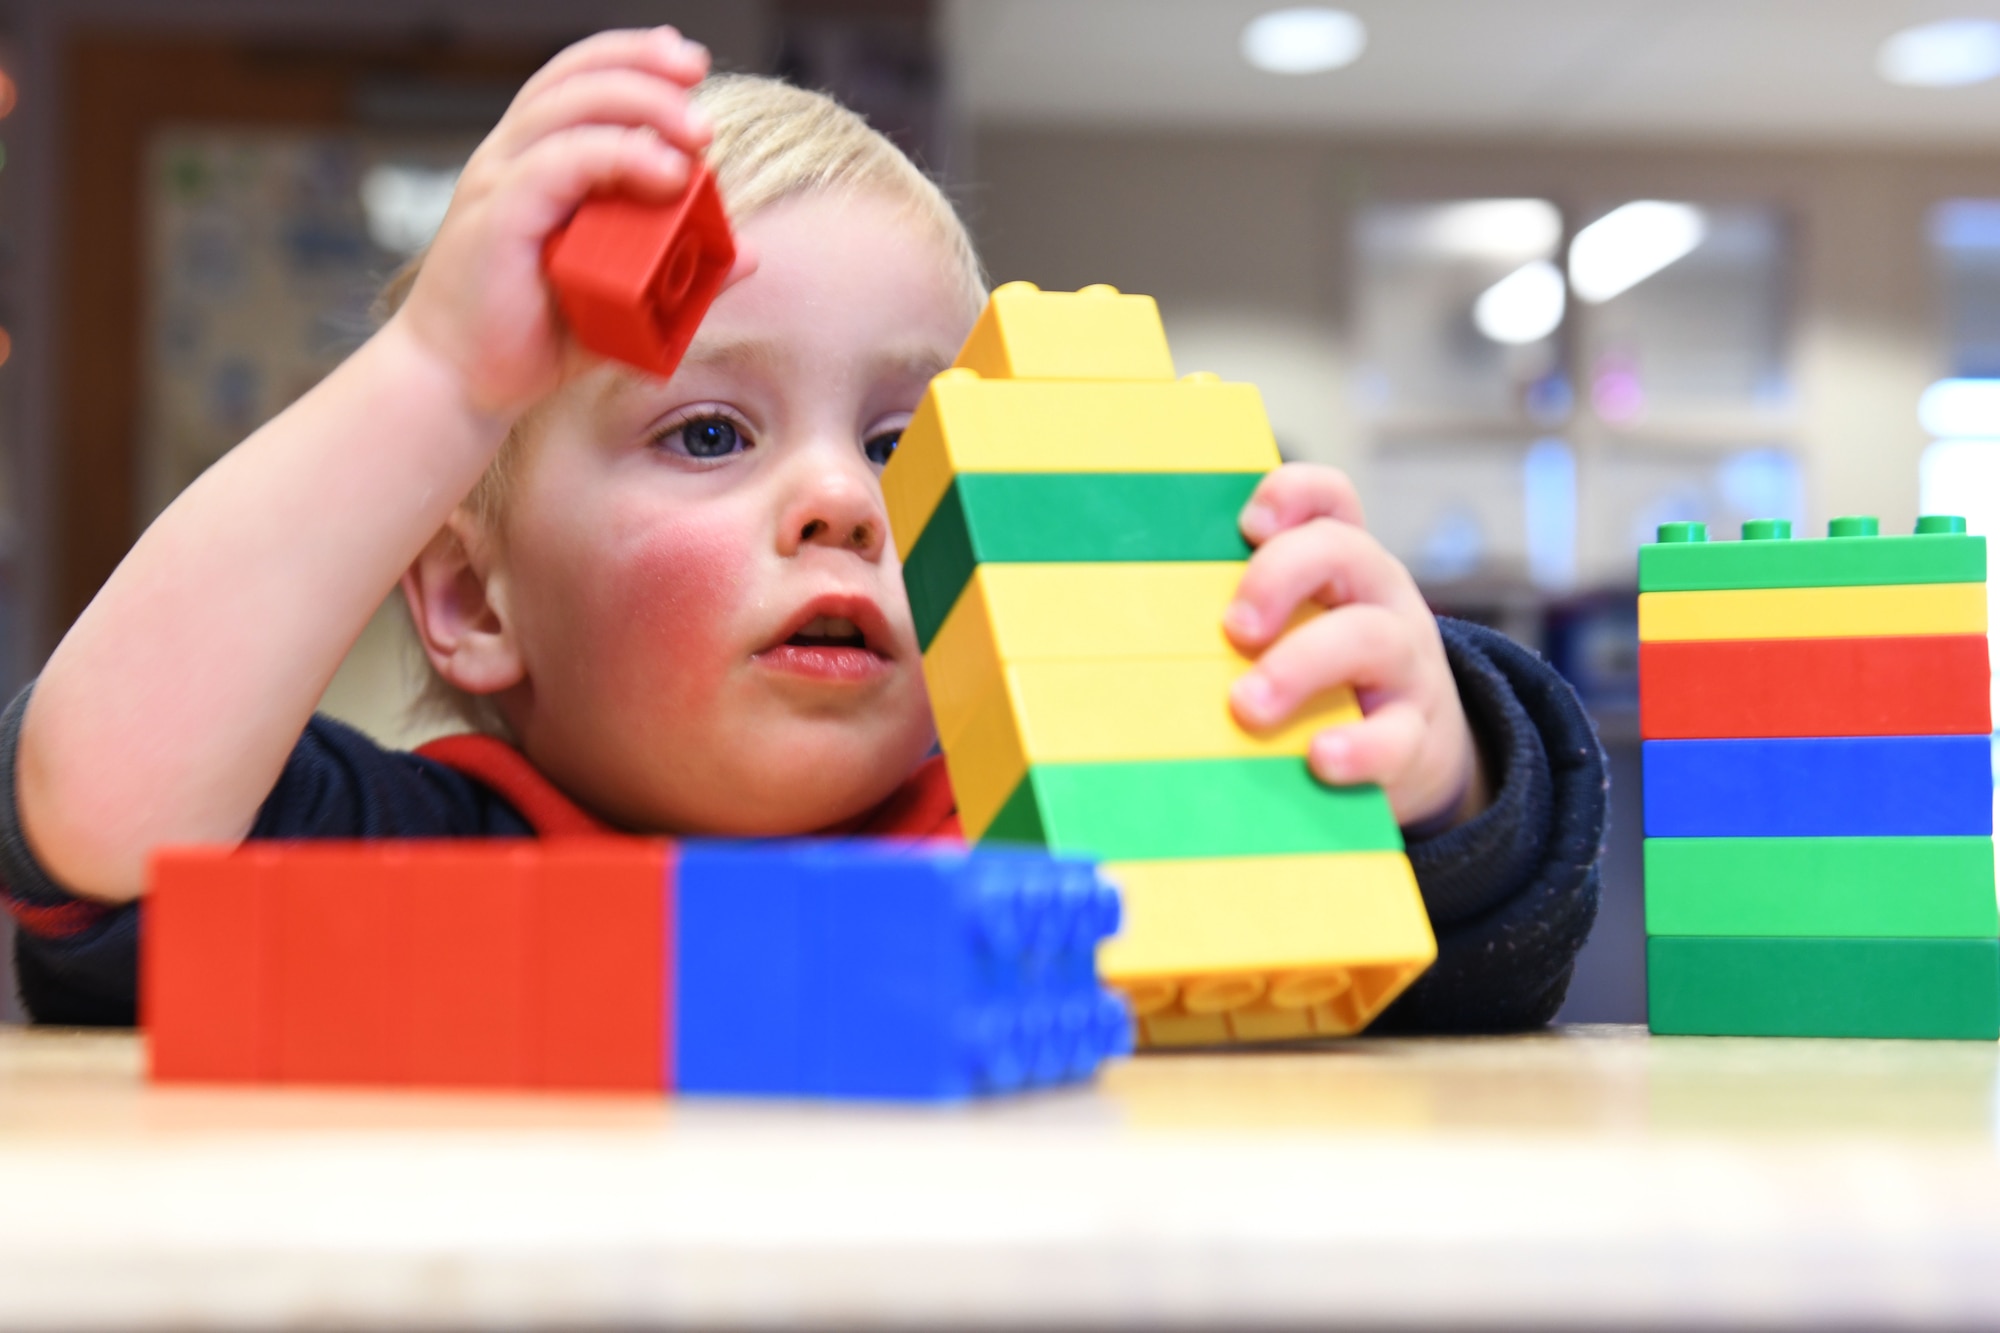 Jackson Scott, the son of Staff Sgt. Matthew Scott a 372nd Training Squadron professional military education instructor, creates a block tower at the McRaven Child Development Center on Ellsworth Air Force Base, S.D., Dec. 6, 2018. Playing with building blocks promotes hand-eye coordination, motor skills and color recognition in young children. (U.S. Air Force photo by Airman 1st Class Christina Bennett)